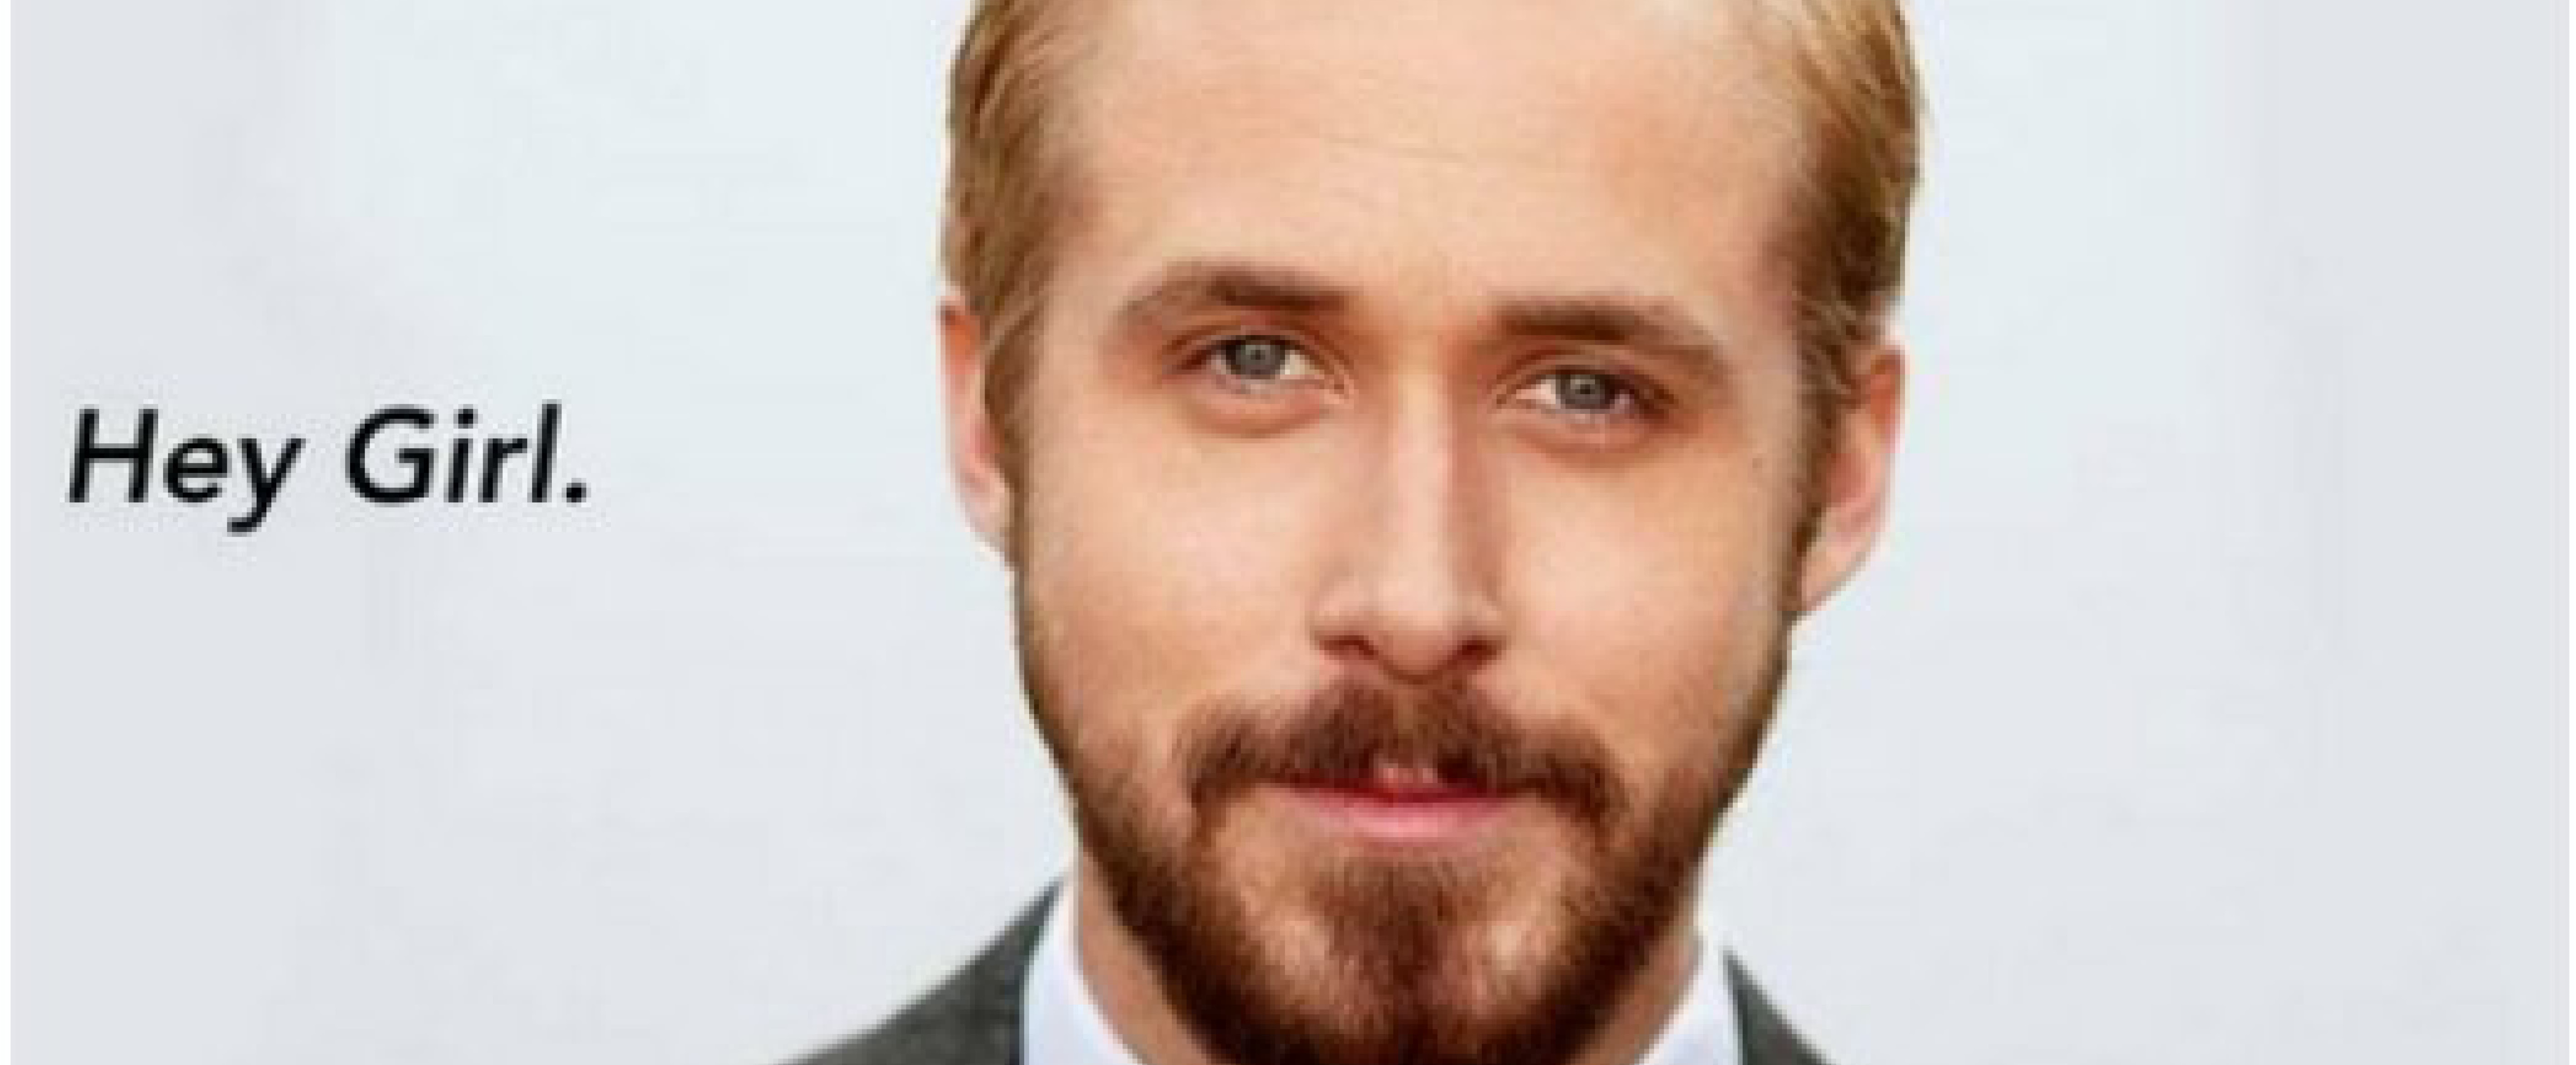 Ryan Gosling “hey Girl” Meme Has A New Meaning Everything Is Awesome